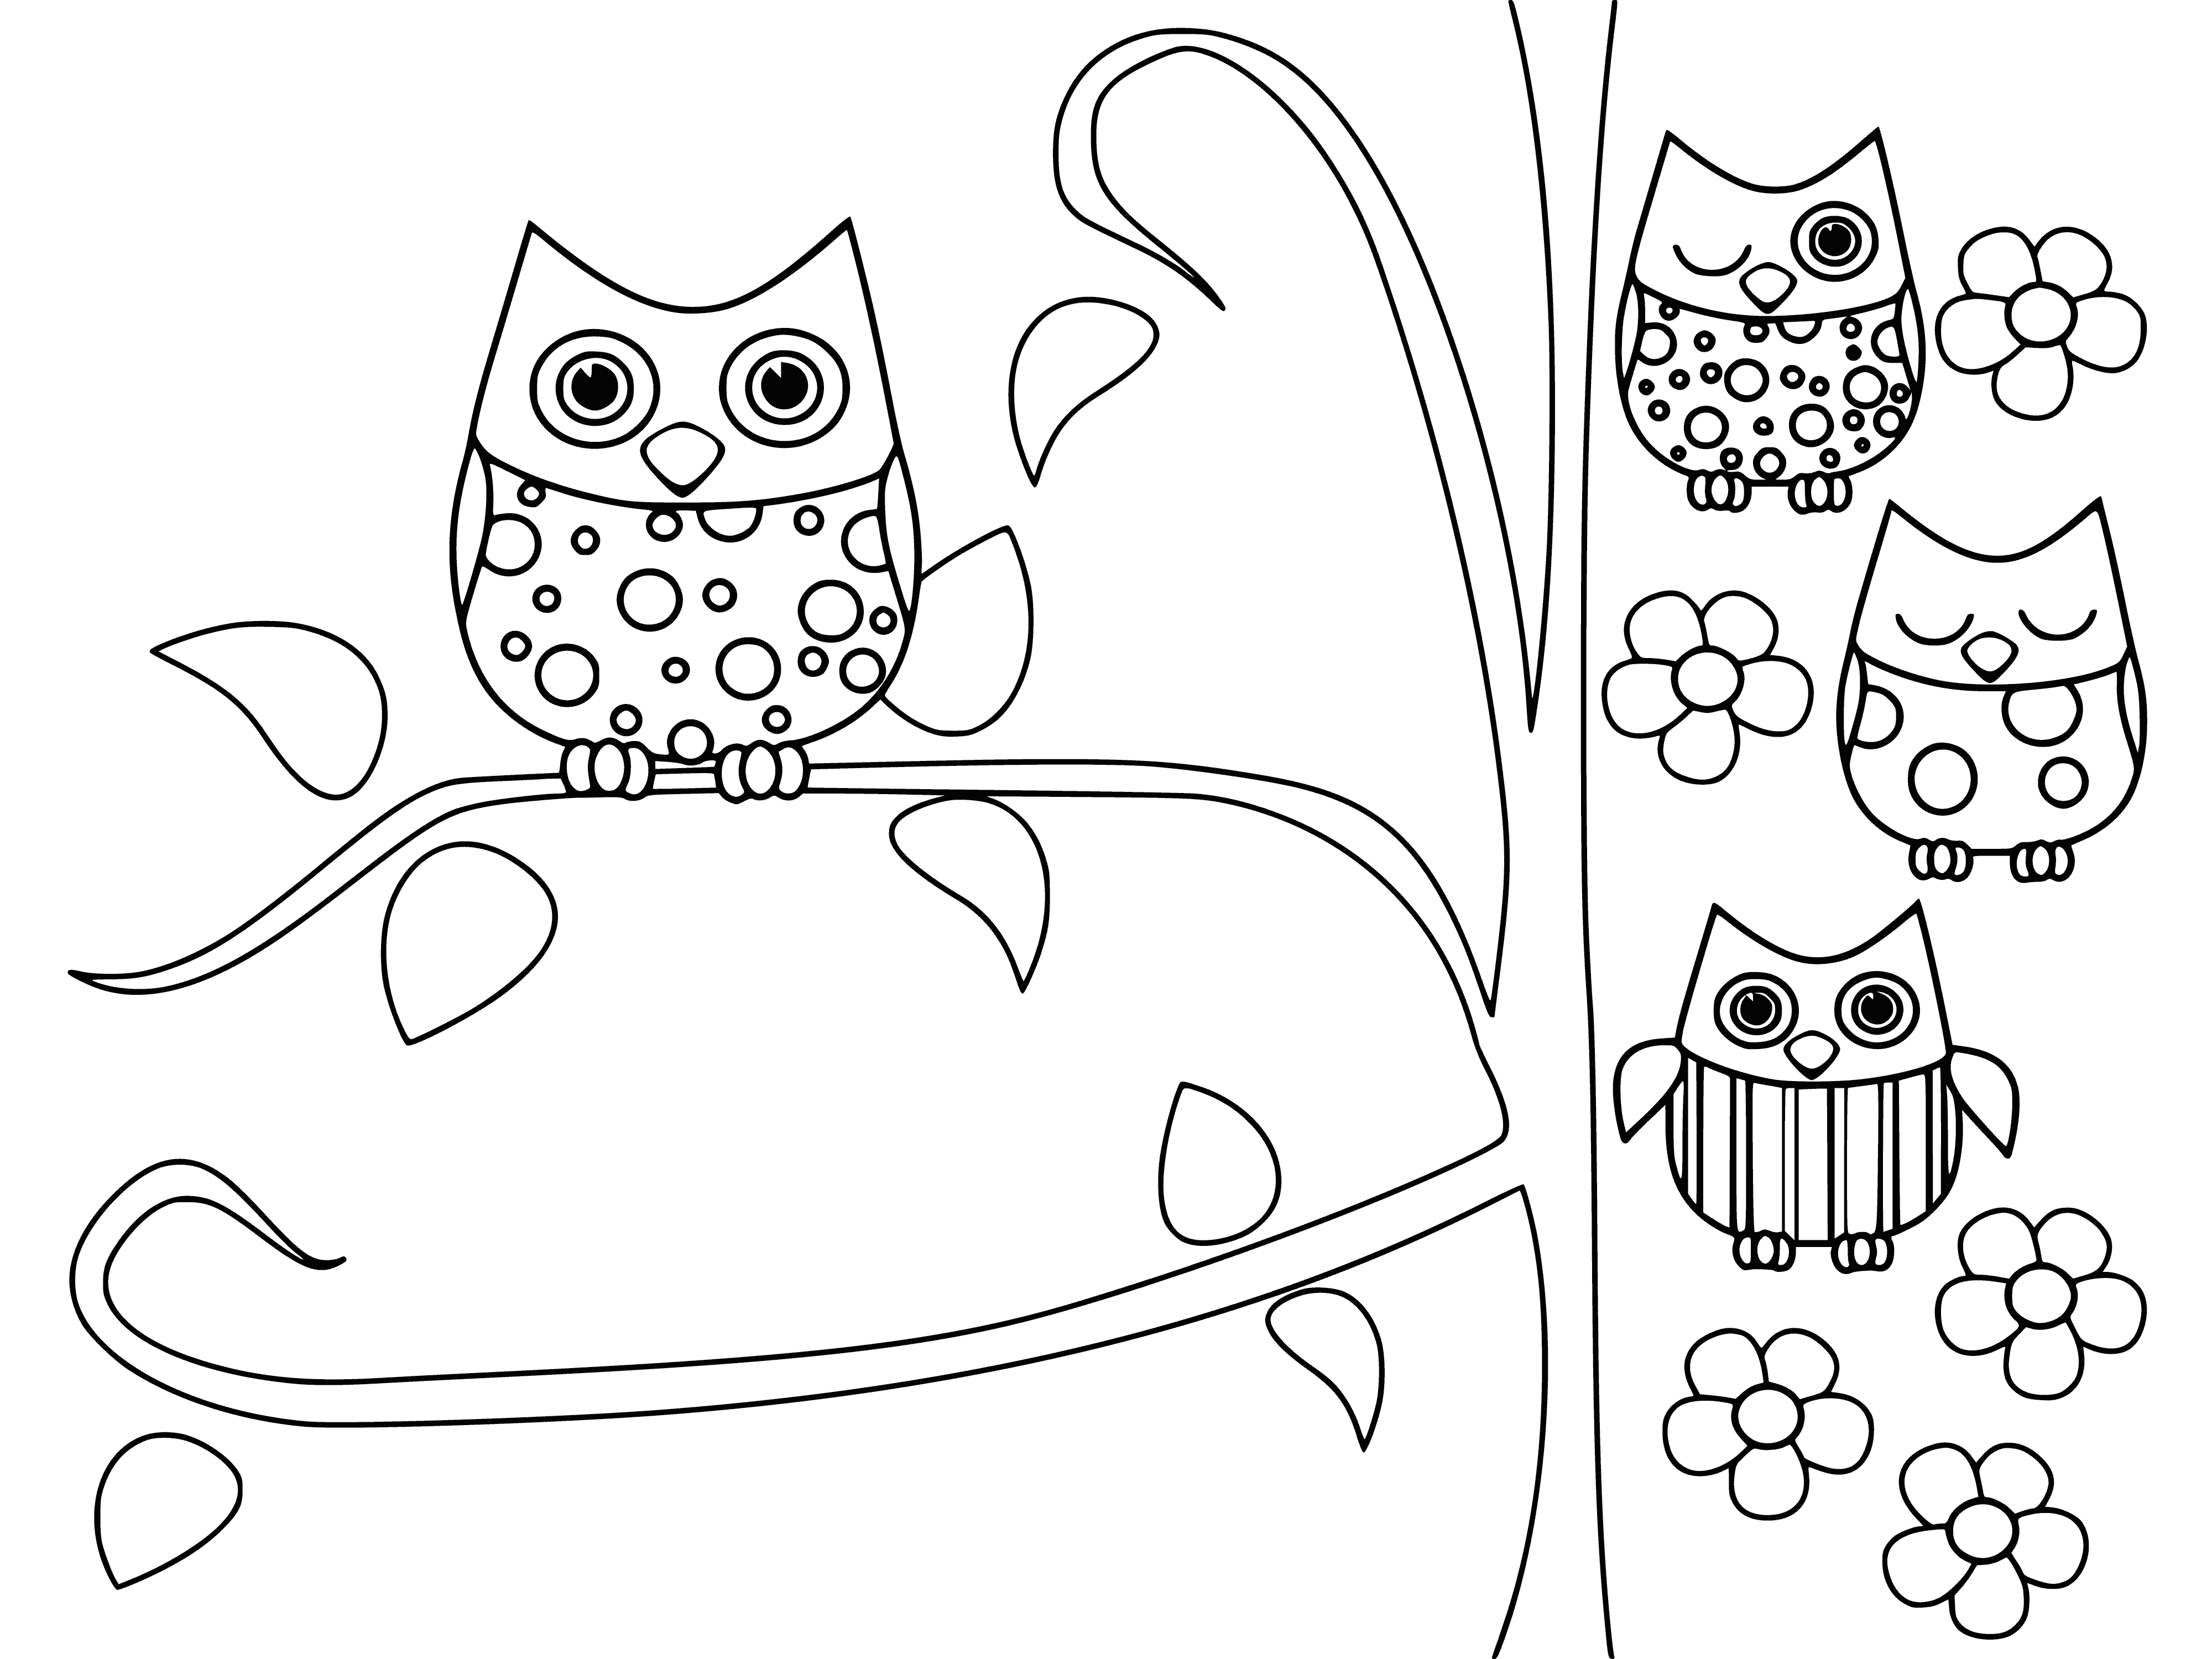 coloring page: Two owls are on a tree branch: 1 brown w/wings out, 1 white & looking.